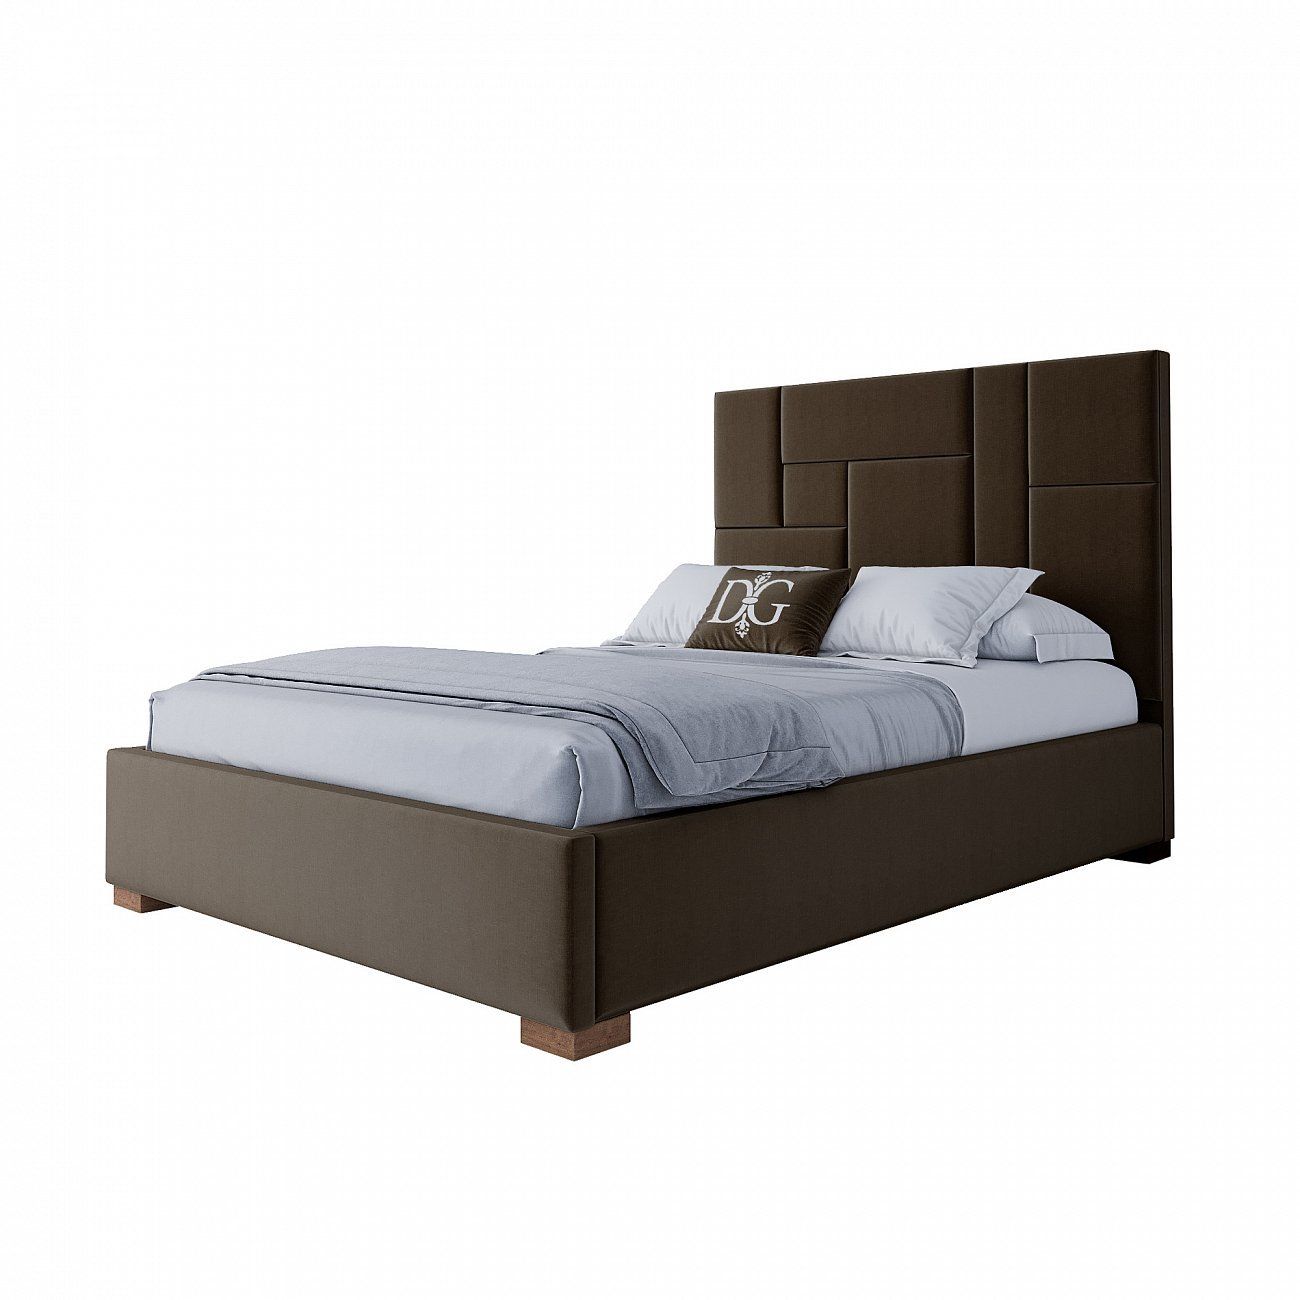 Double bed with upholstered headboard 140x200 cm brown Wax